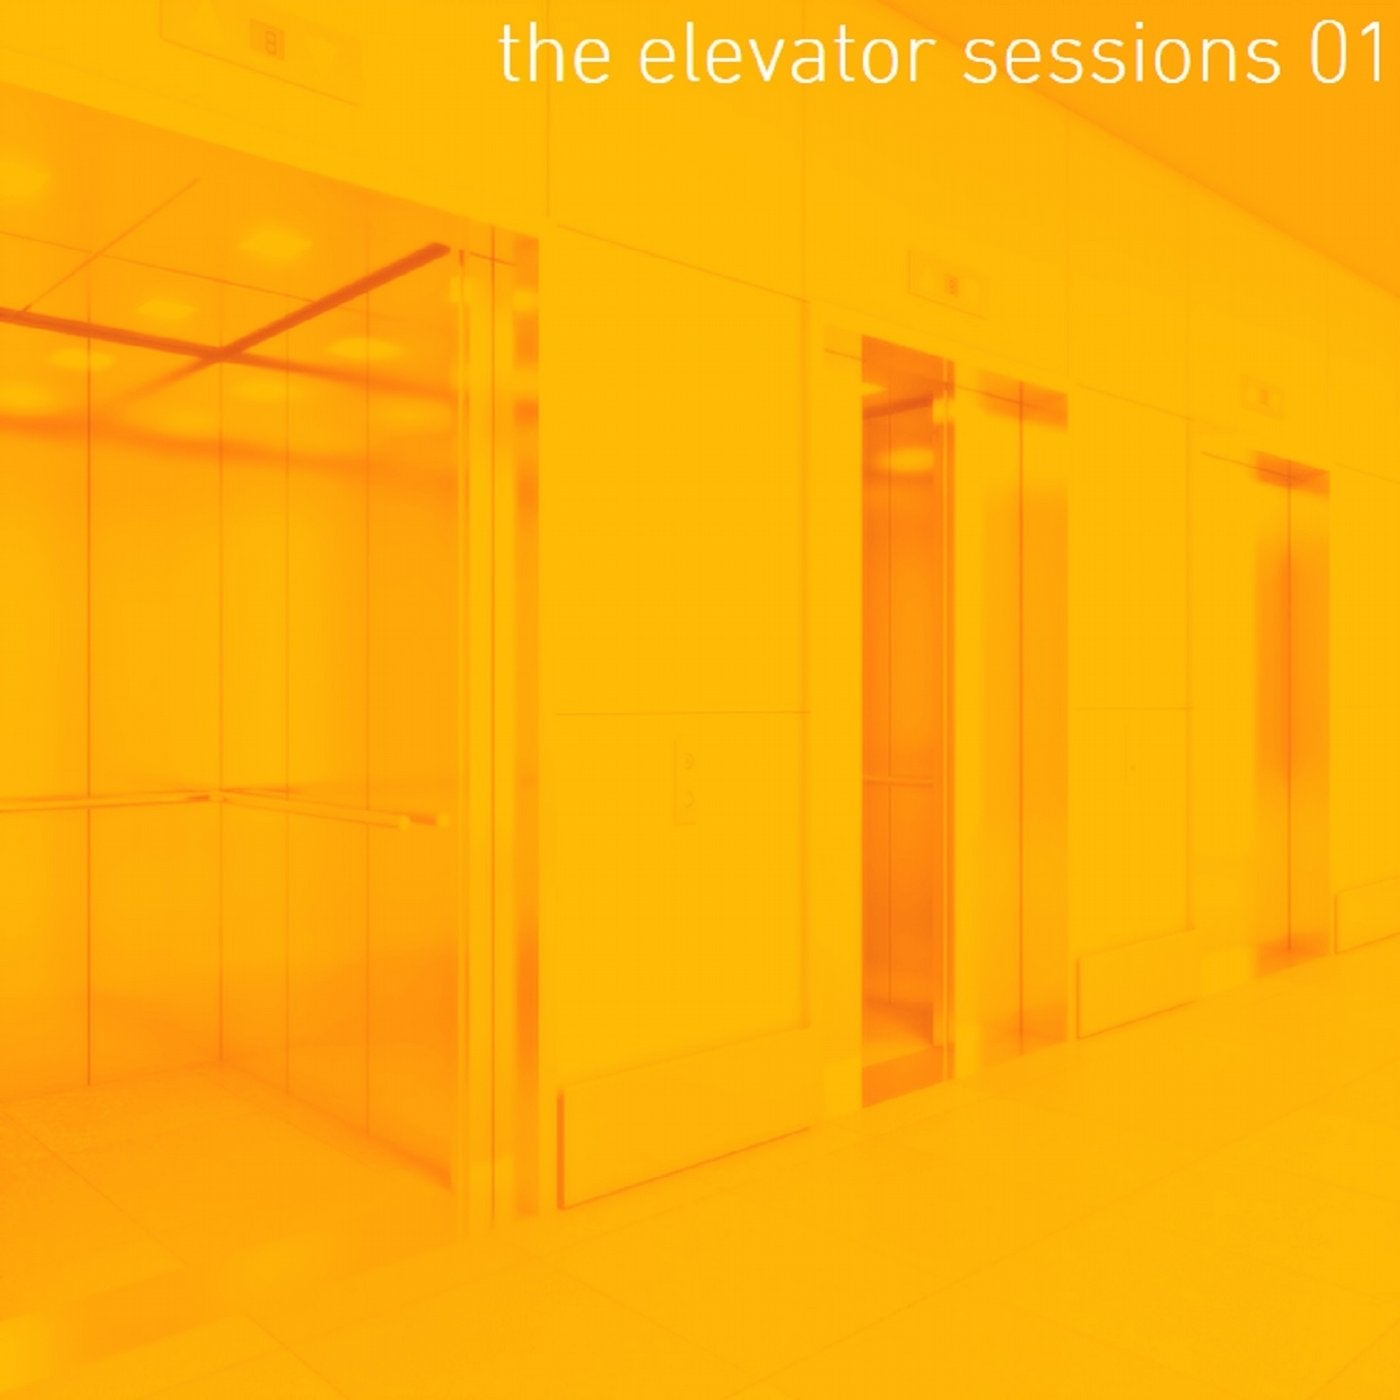 The Elevator Sessions 01 (Compiled & mixed by klangstein)